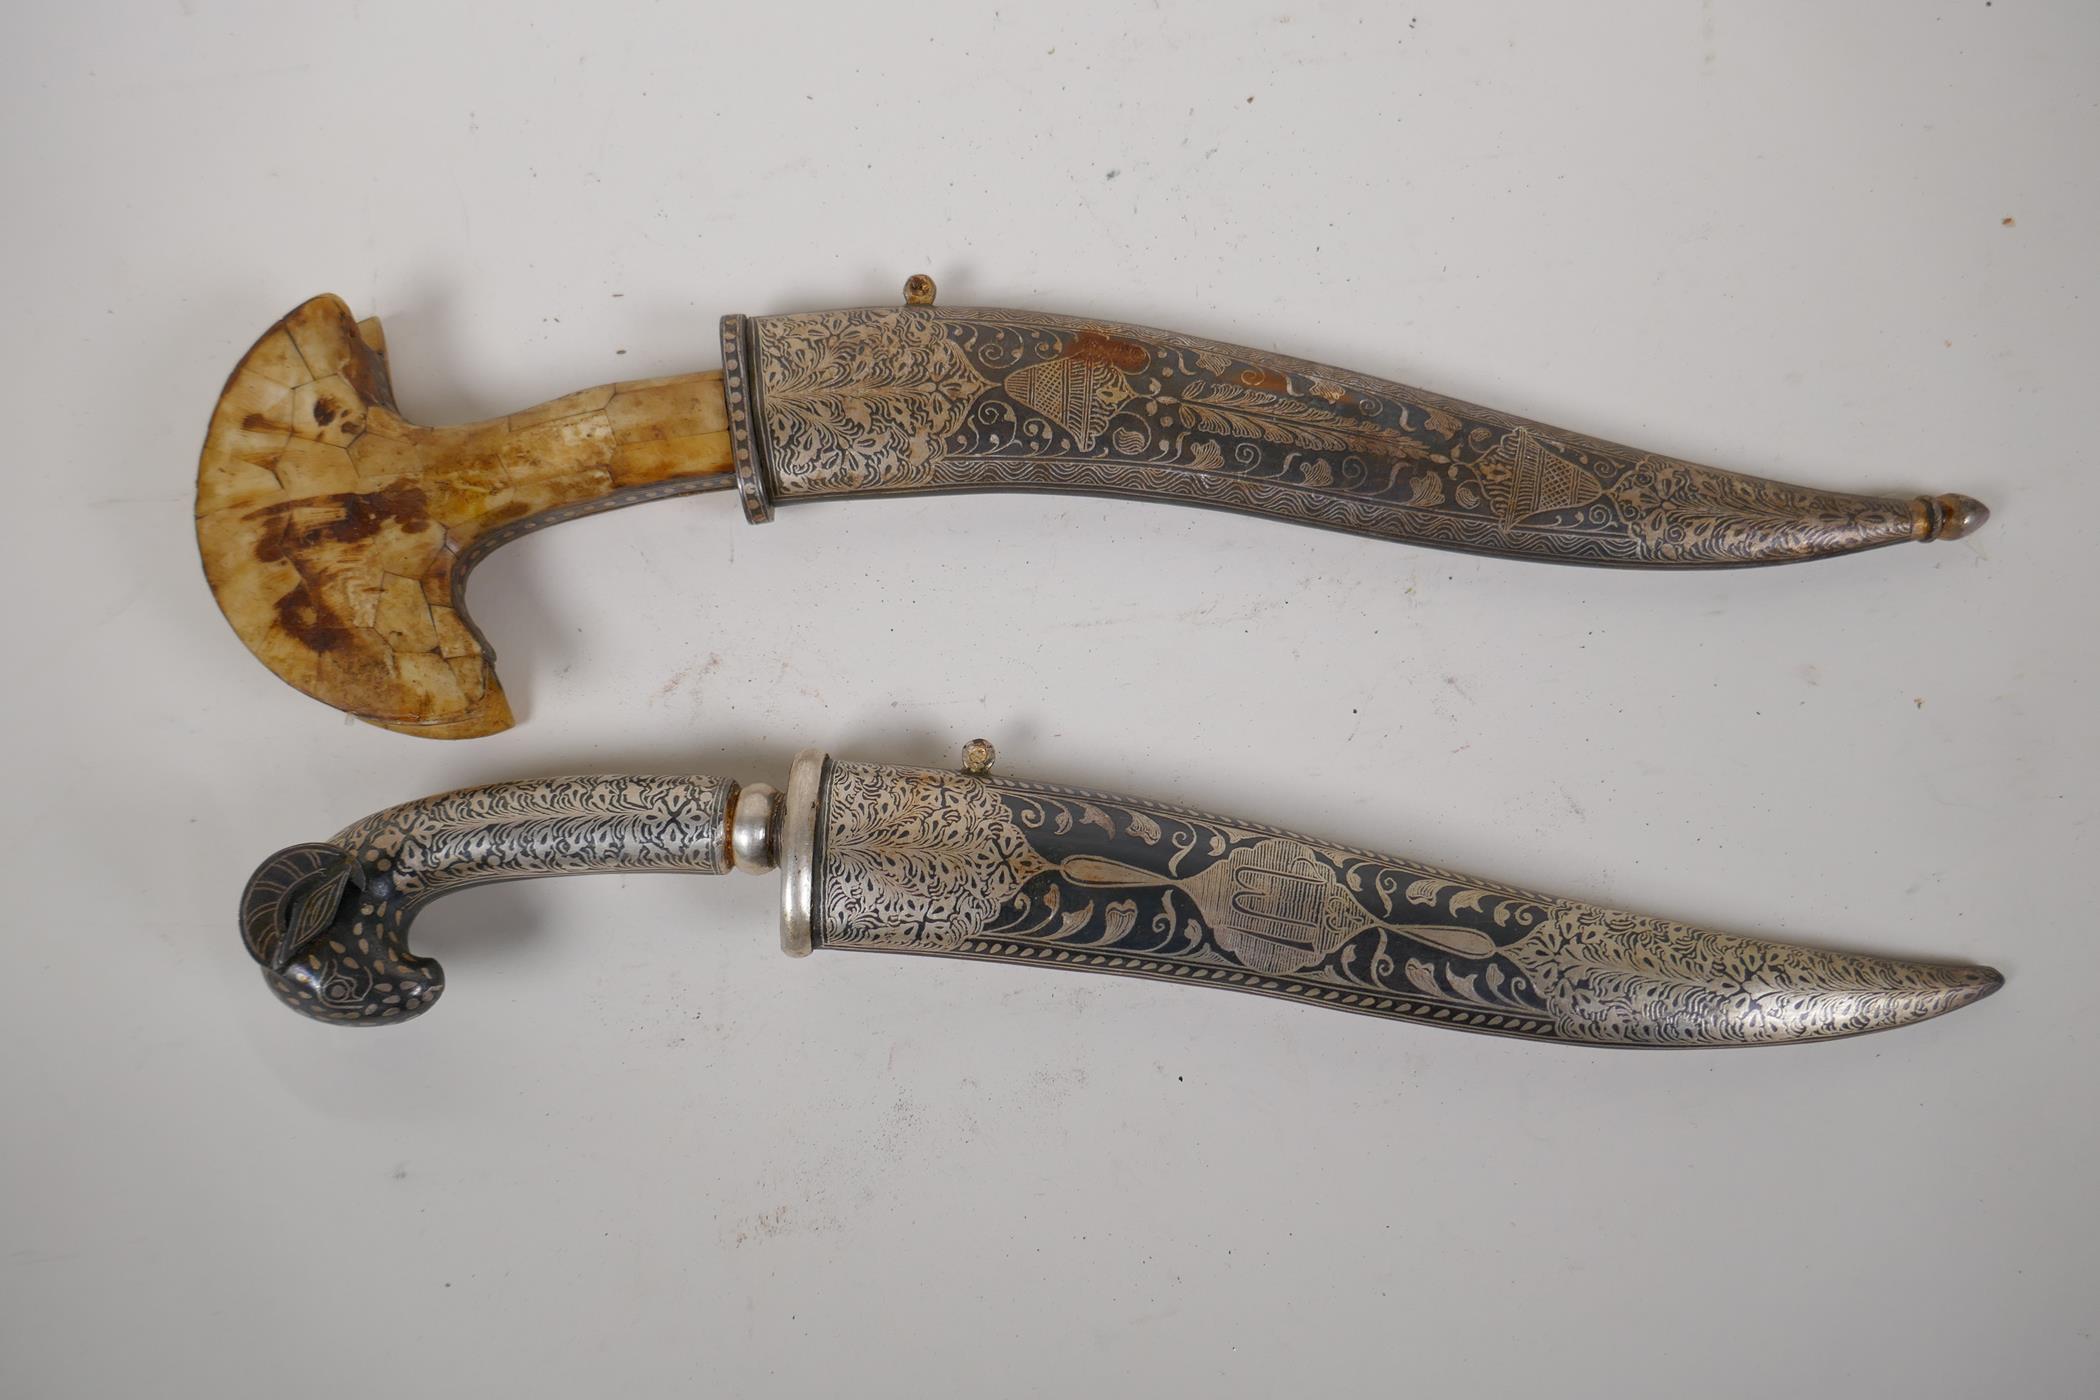 An Eastern dagger with rams mask handle and niello decorated scabbard, 15" long, and a horn